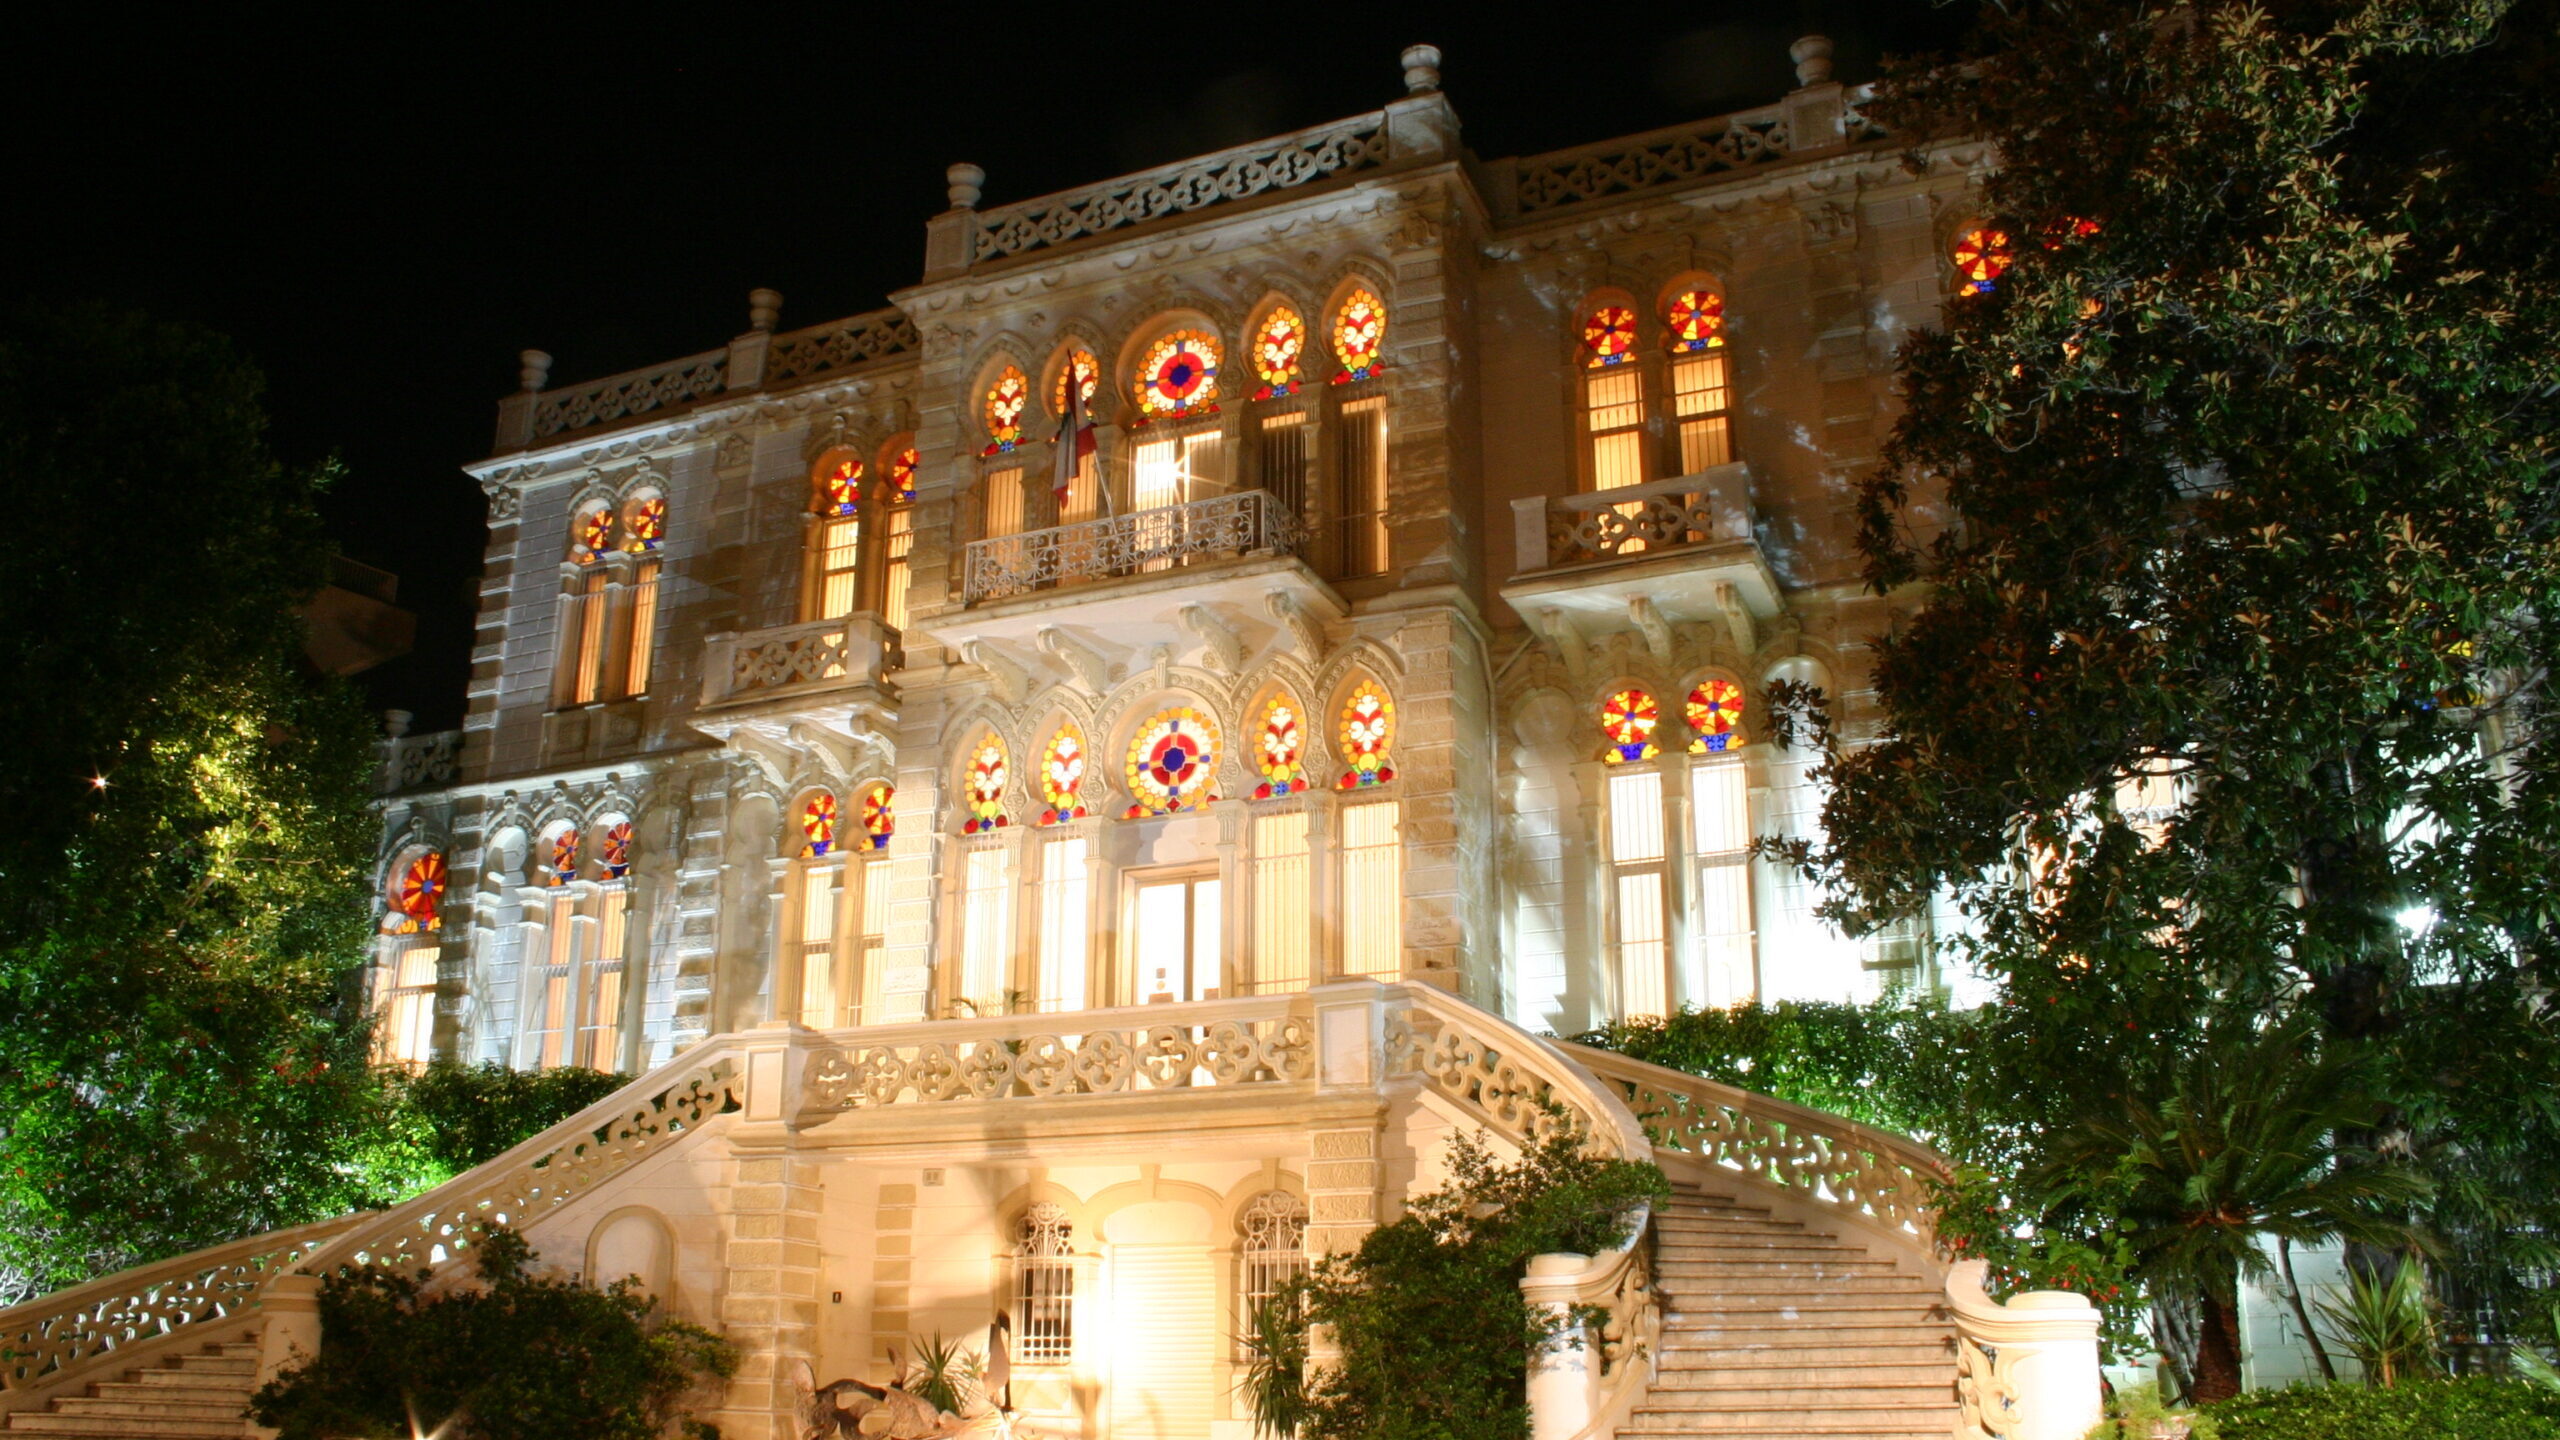 Beirut’s Sursock Museum Reopens 3 Years After Devastating Port Explosions